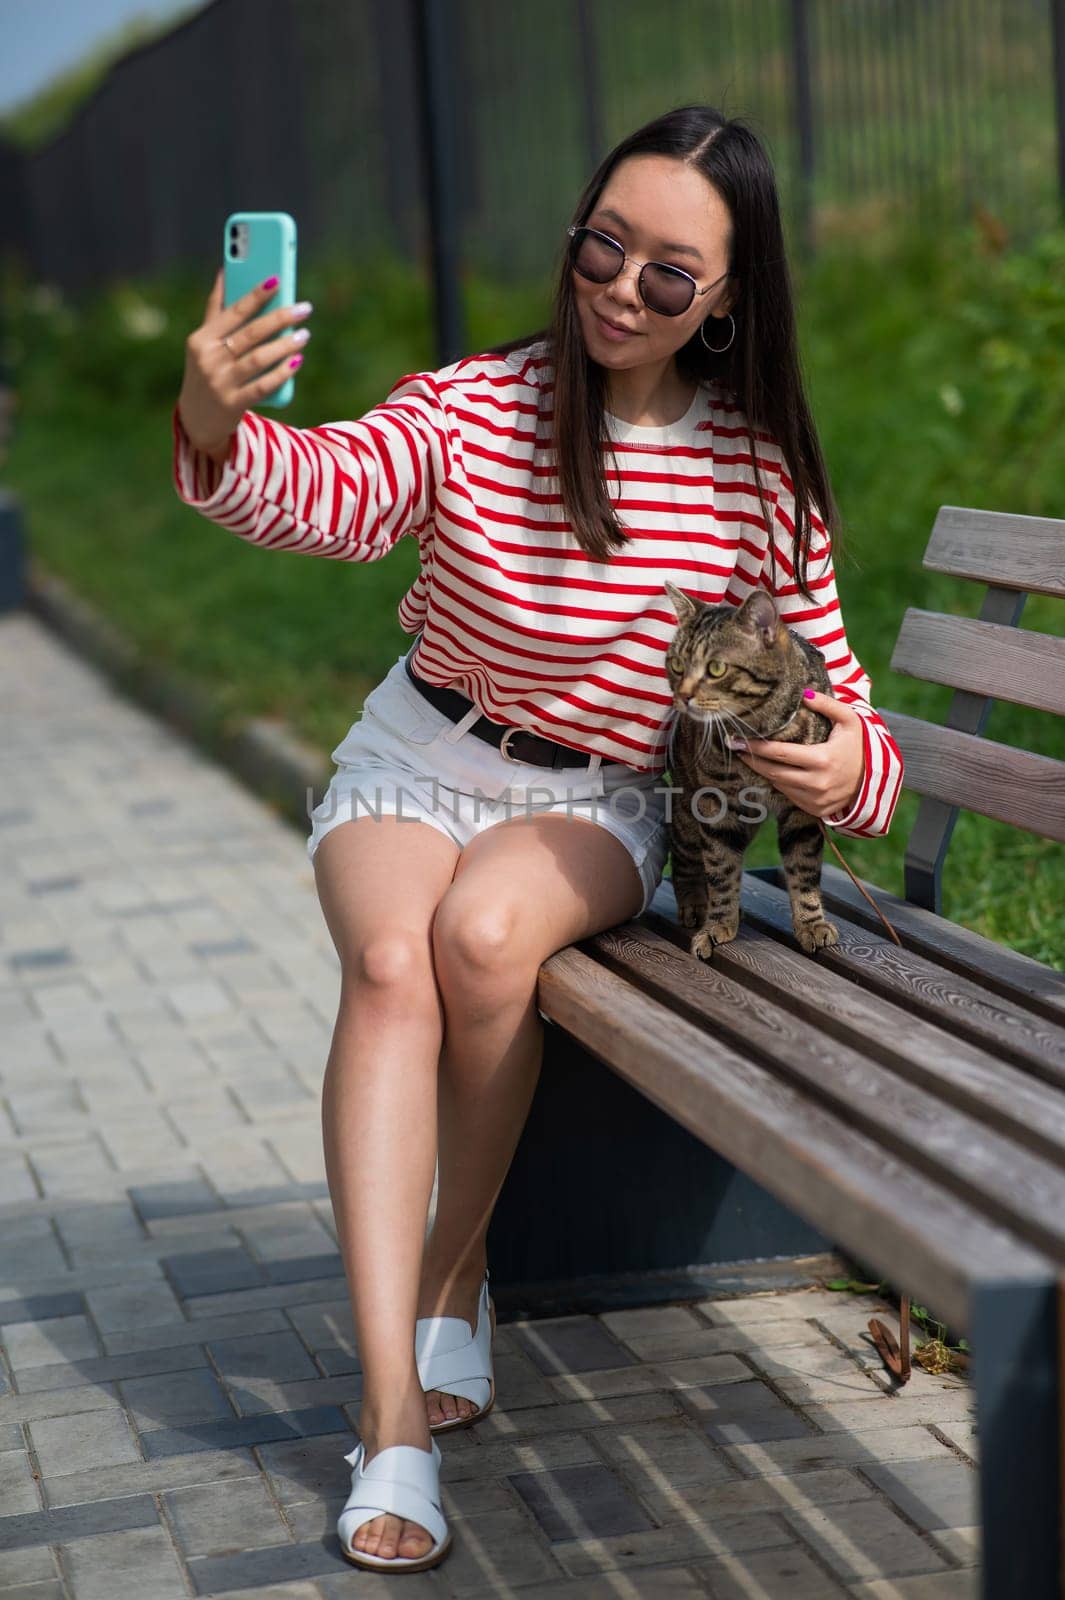 Young woman sits on a bench with a tabby cat and takes a selfie on a smartphone outdoors